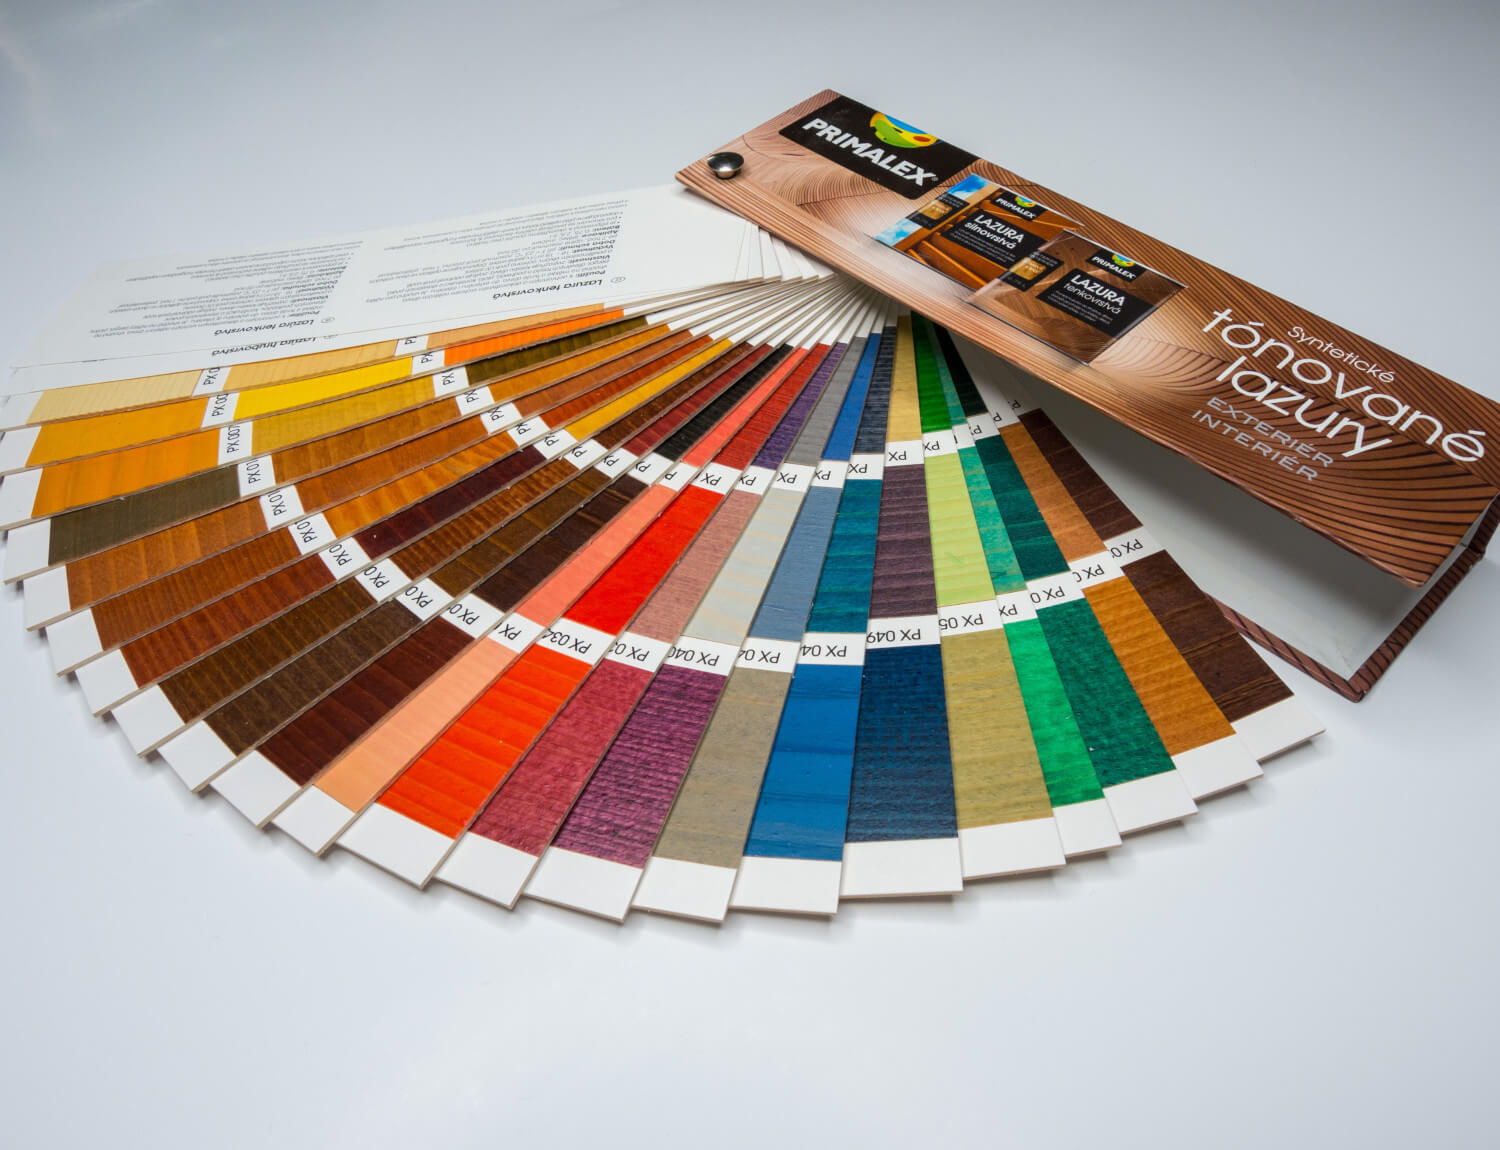 Wooden marketing tools for showcasing color on wood